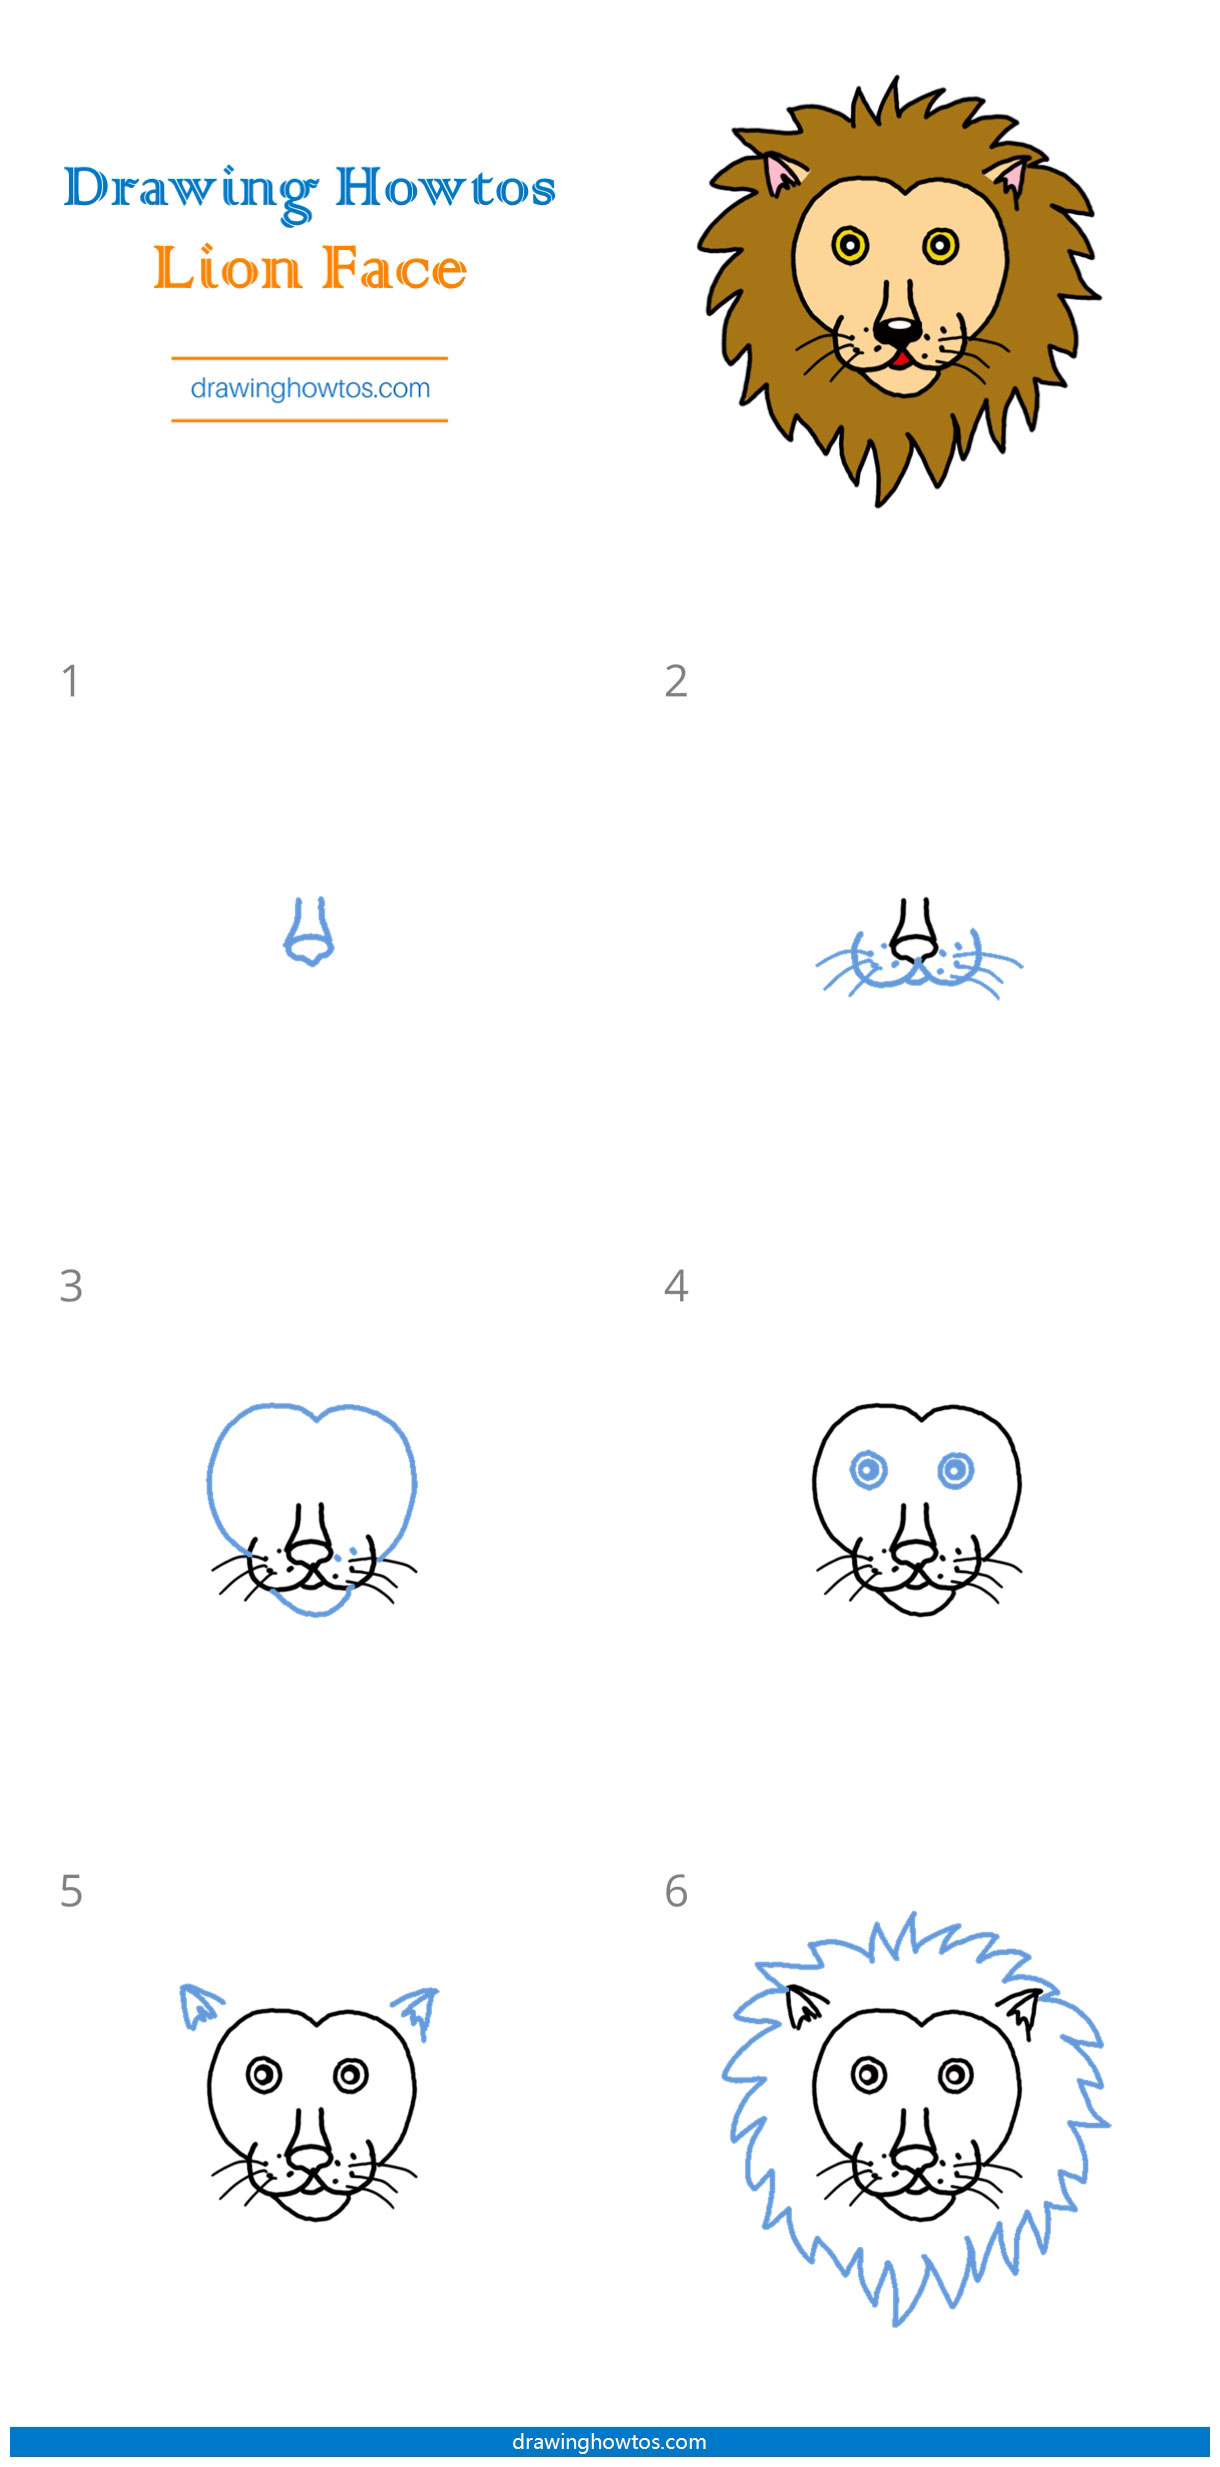 How to Draw a Lion Face Step by Step